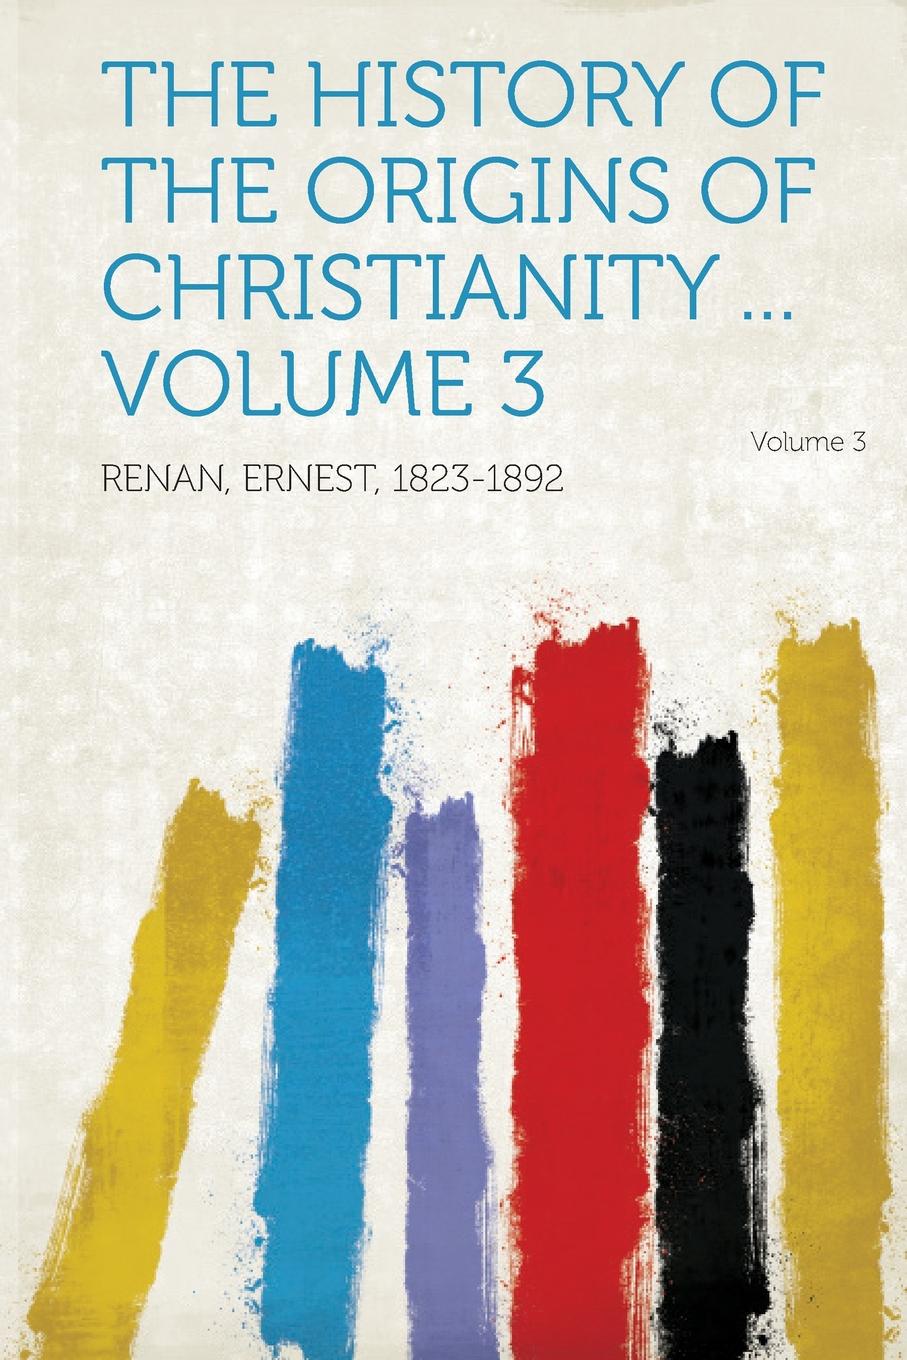 The History of the Origins of Christianity ... Volume 3